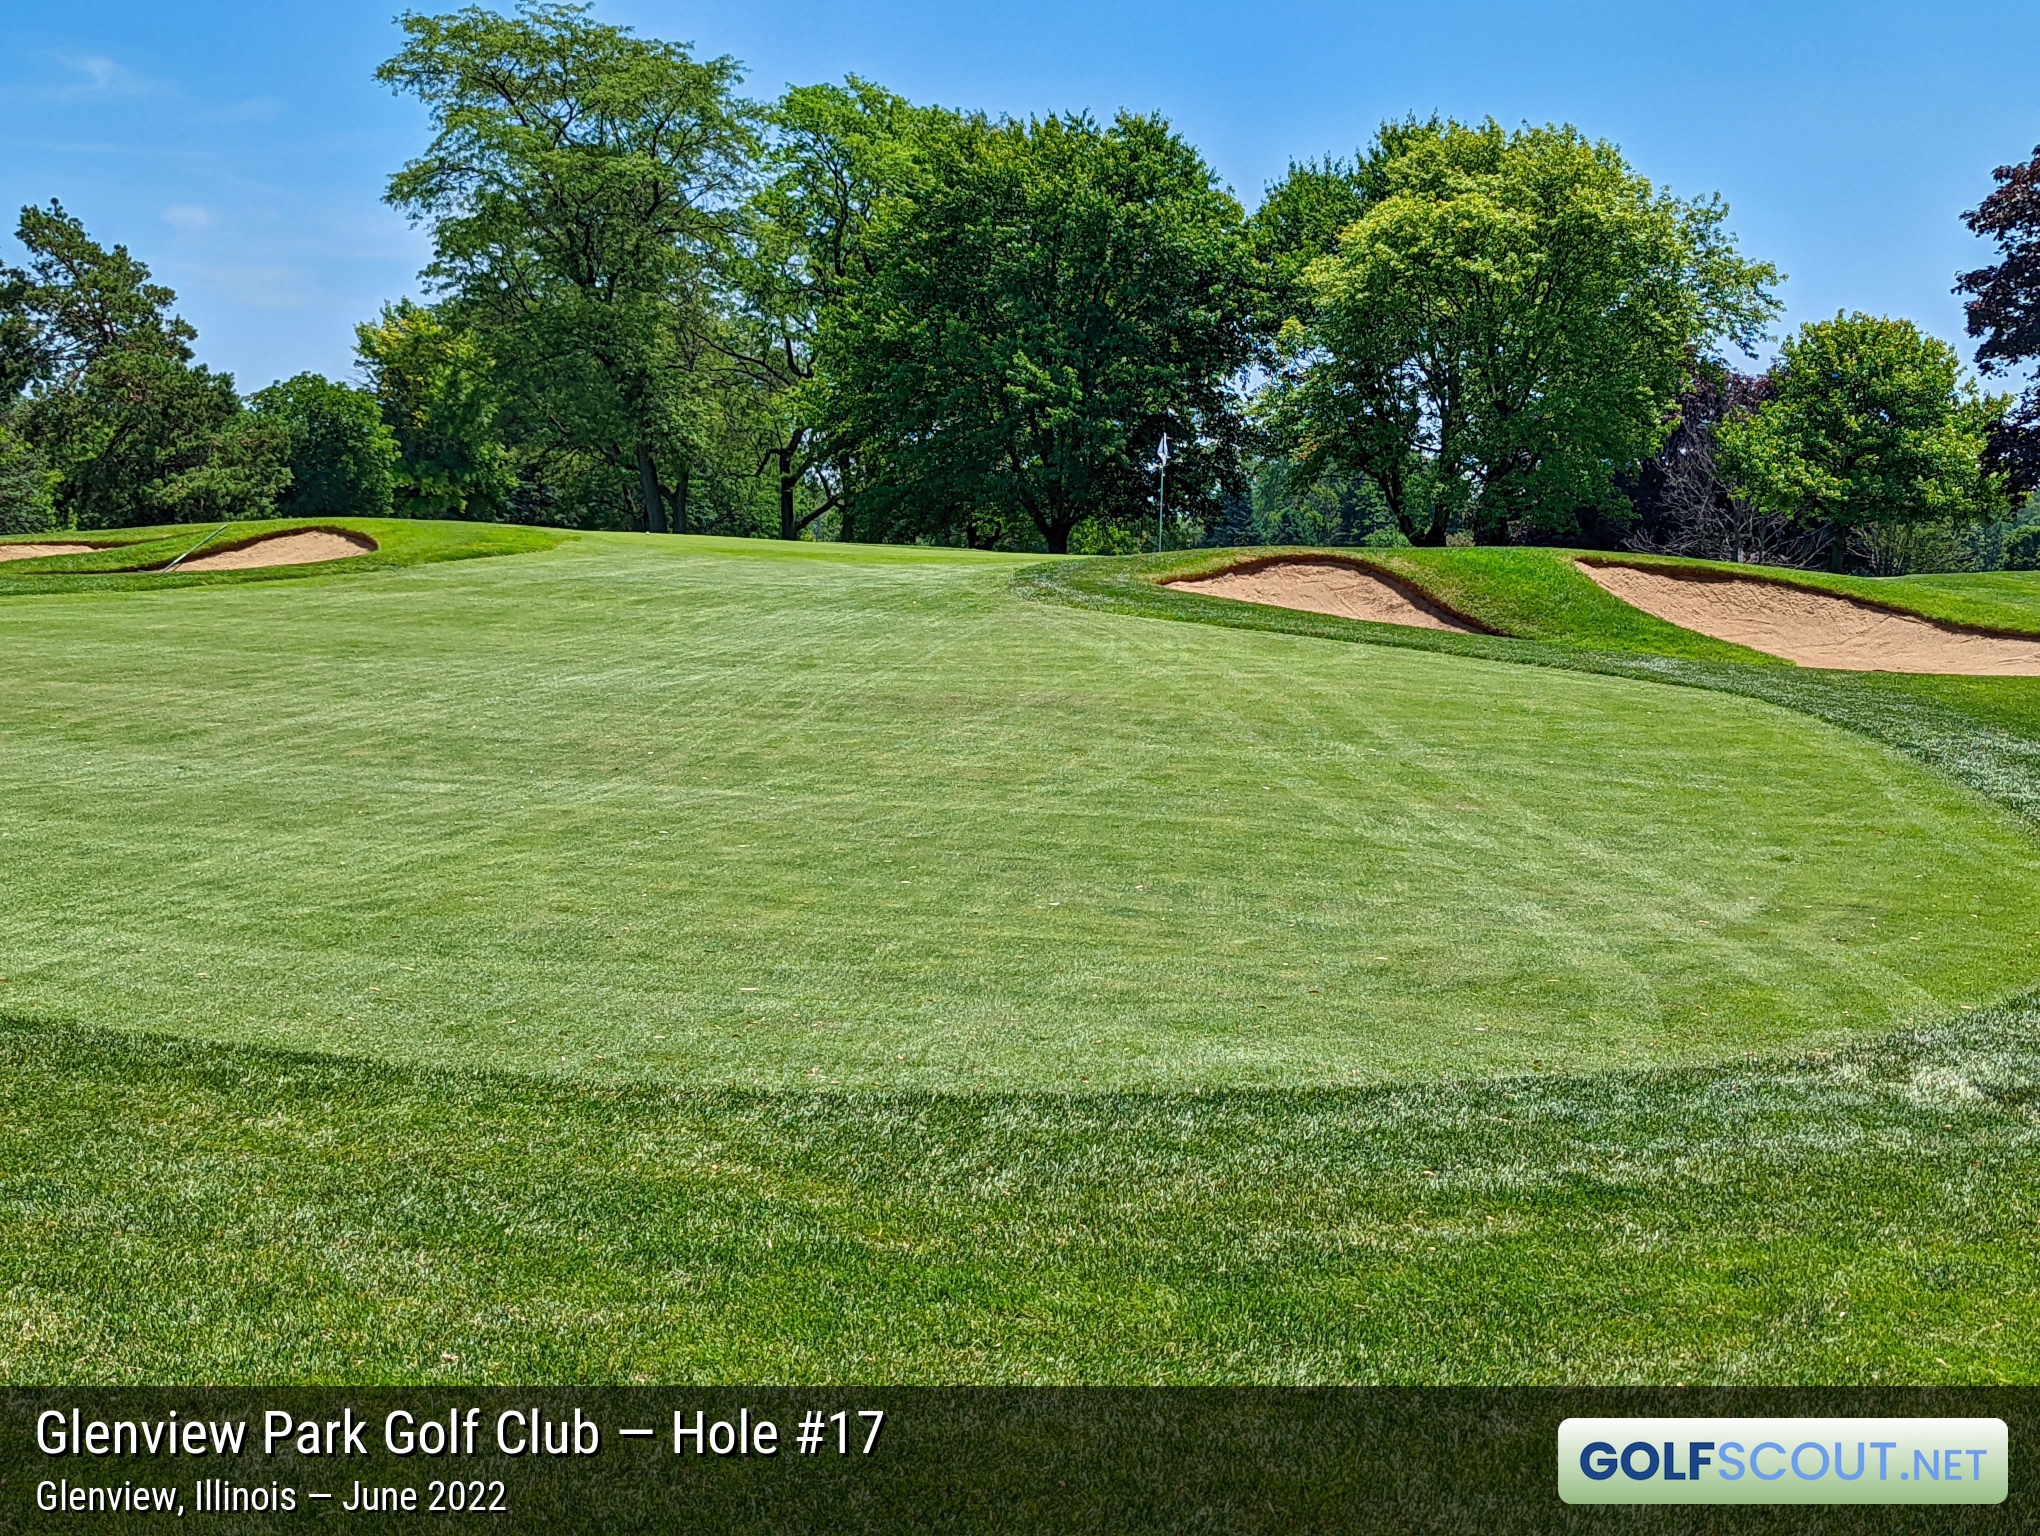 Photo of hole #17 at Glenview Park Golf Club in Glenview, Illinois. 